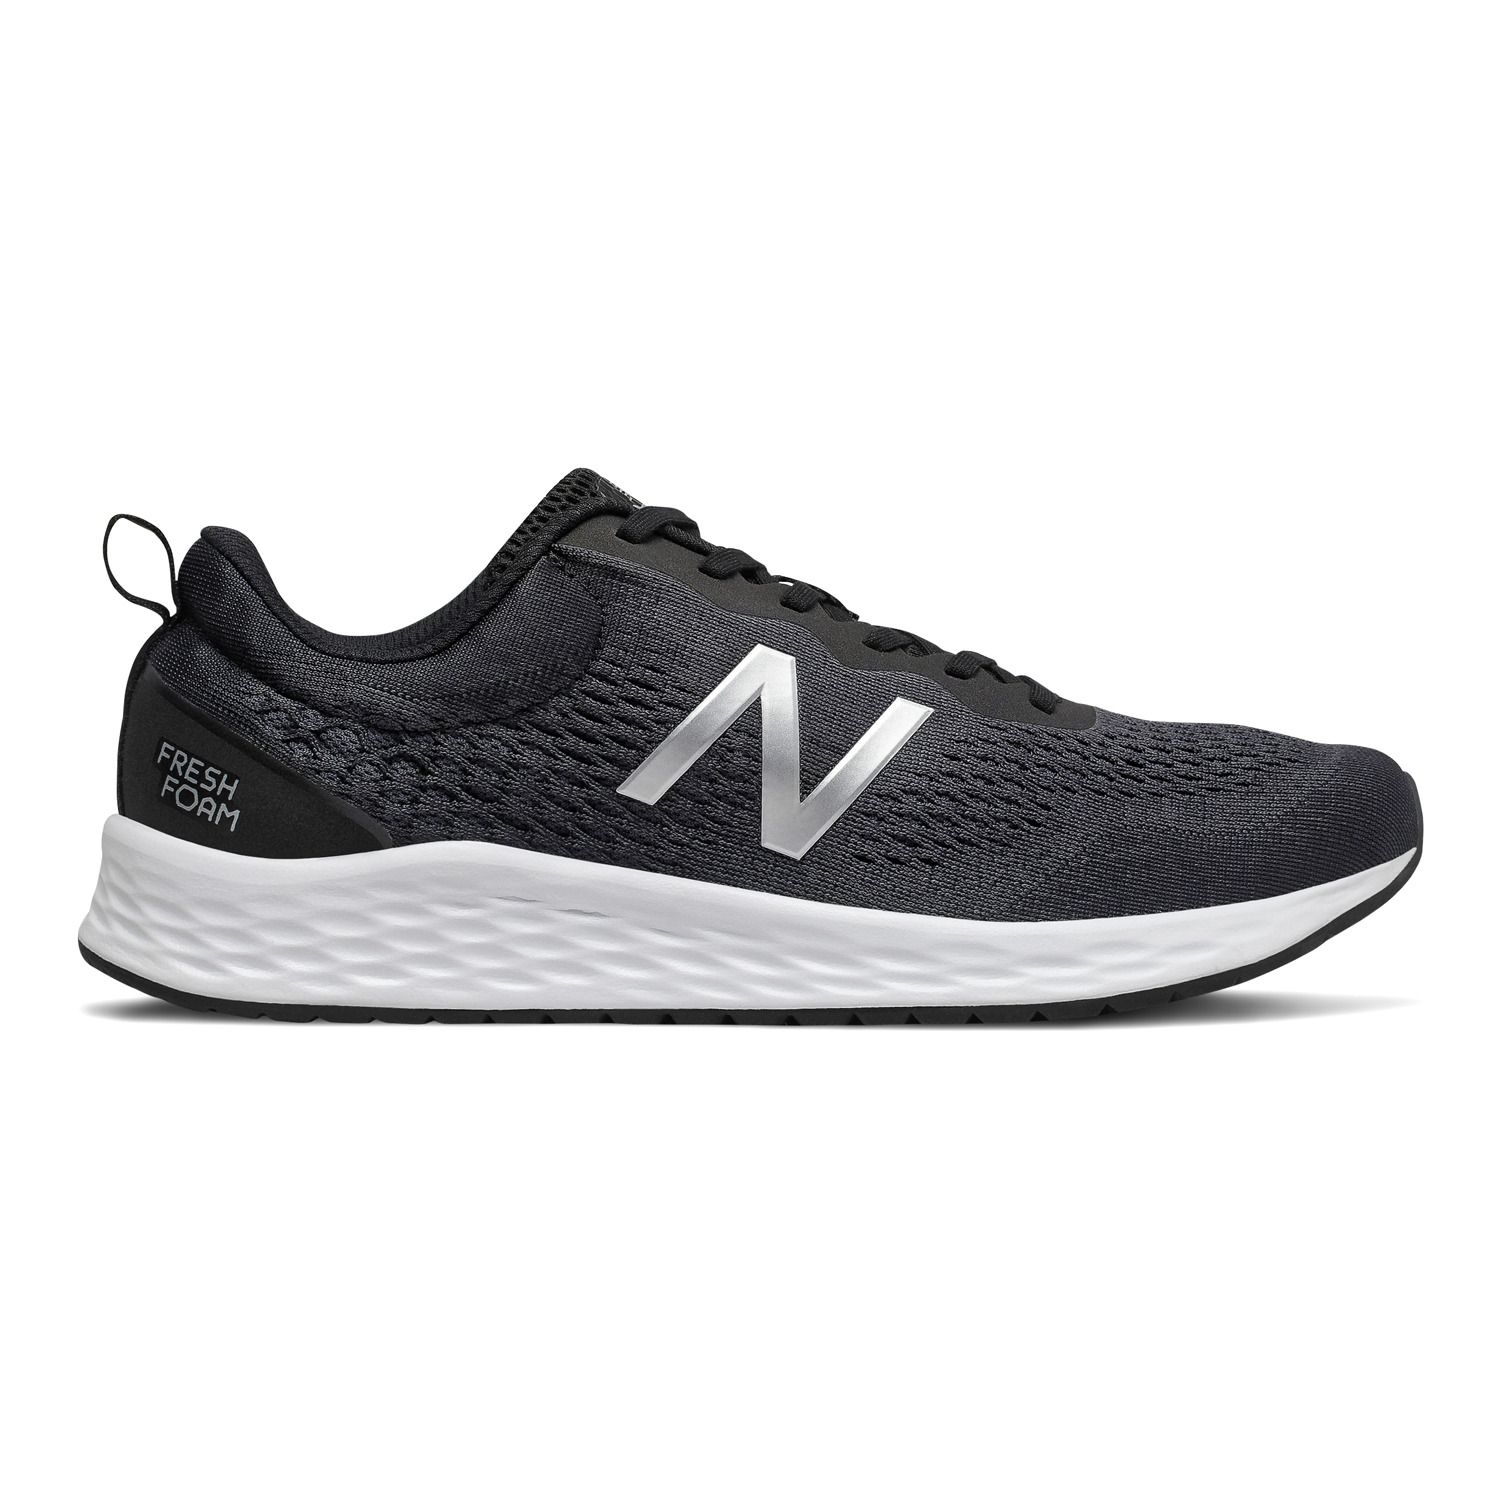 new balance sneakers at kohl's